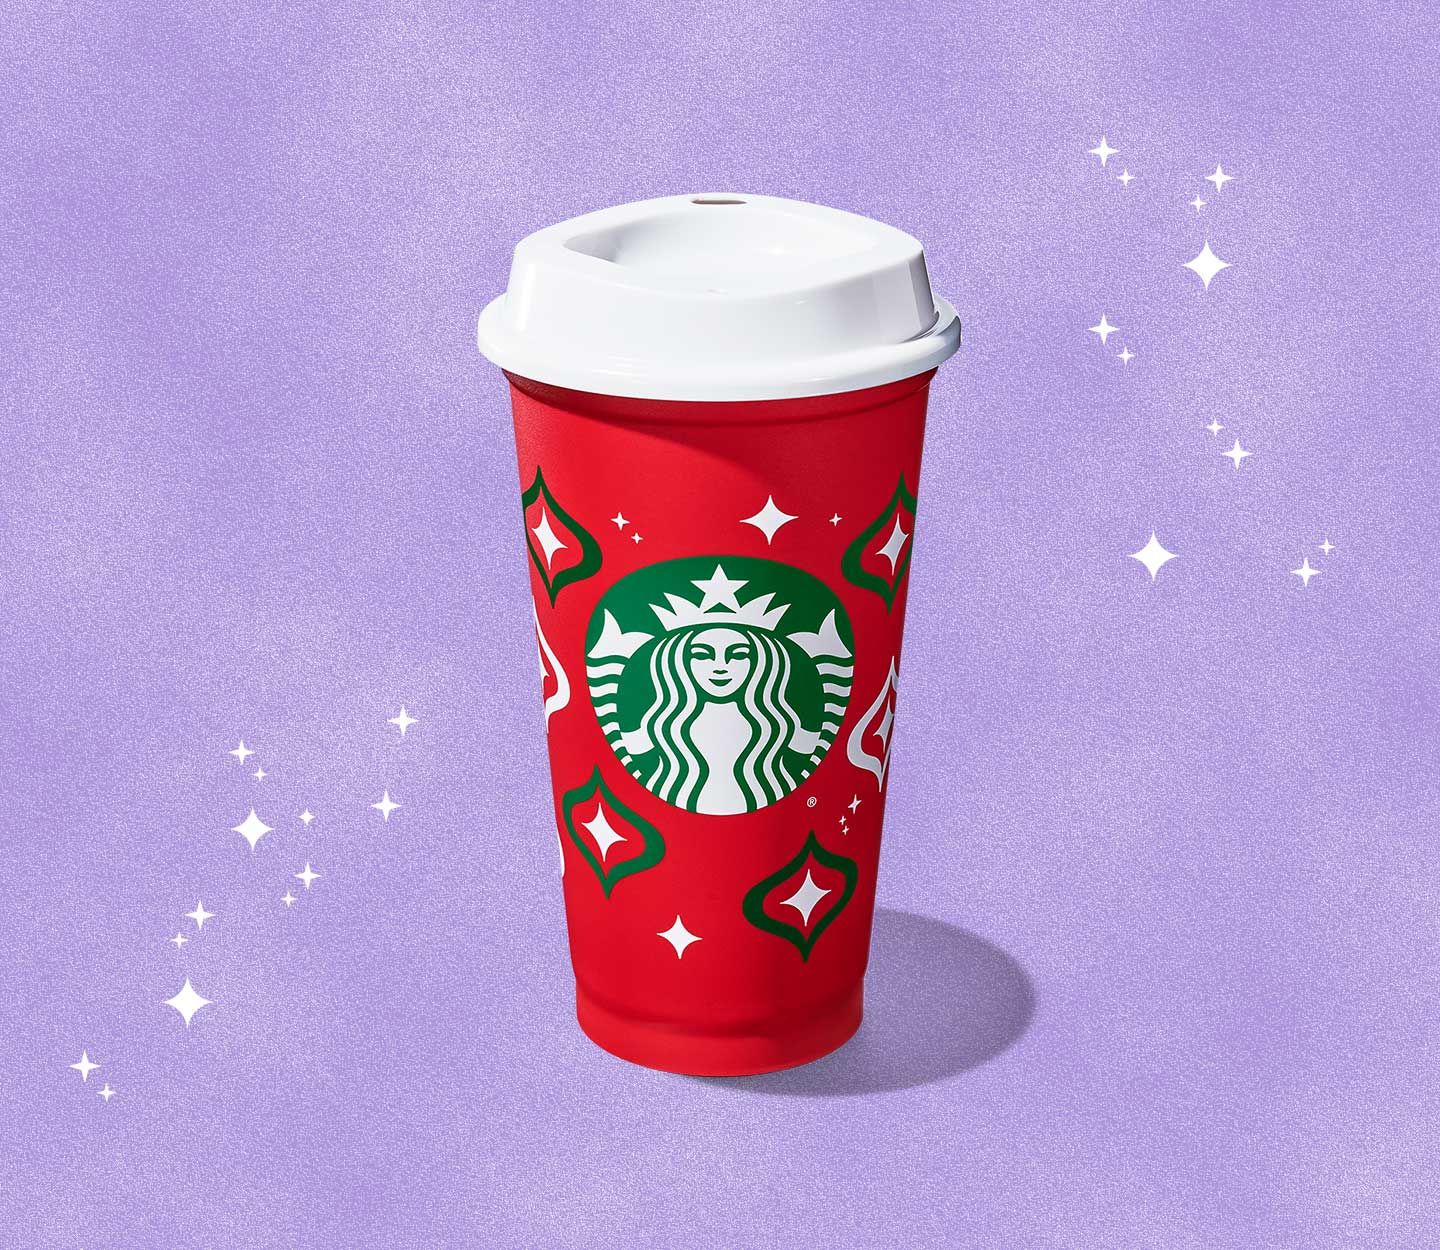 Celebrate Red Cup Day at Starbucks on 17th Street OCMD Restaurants